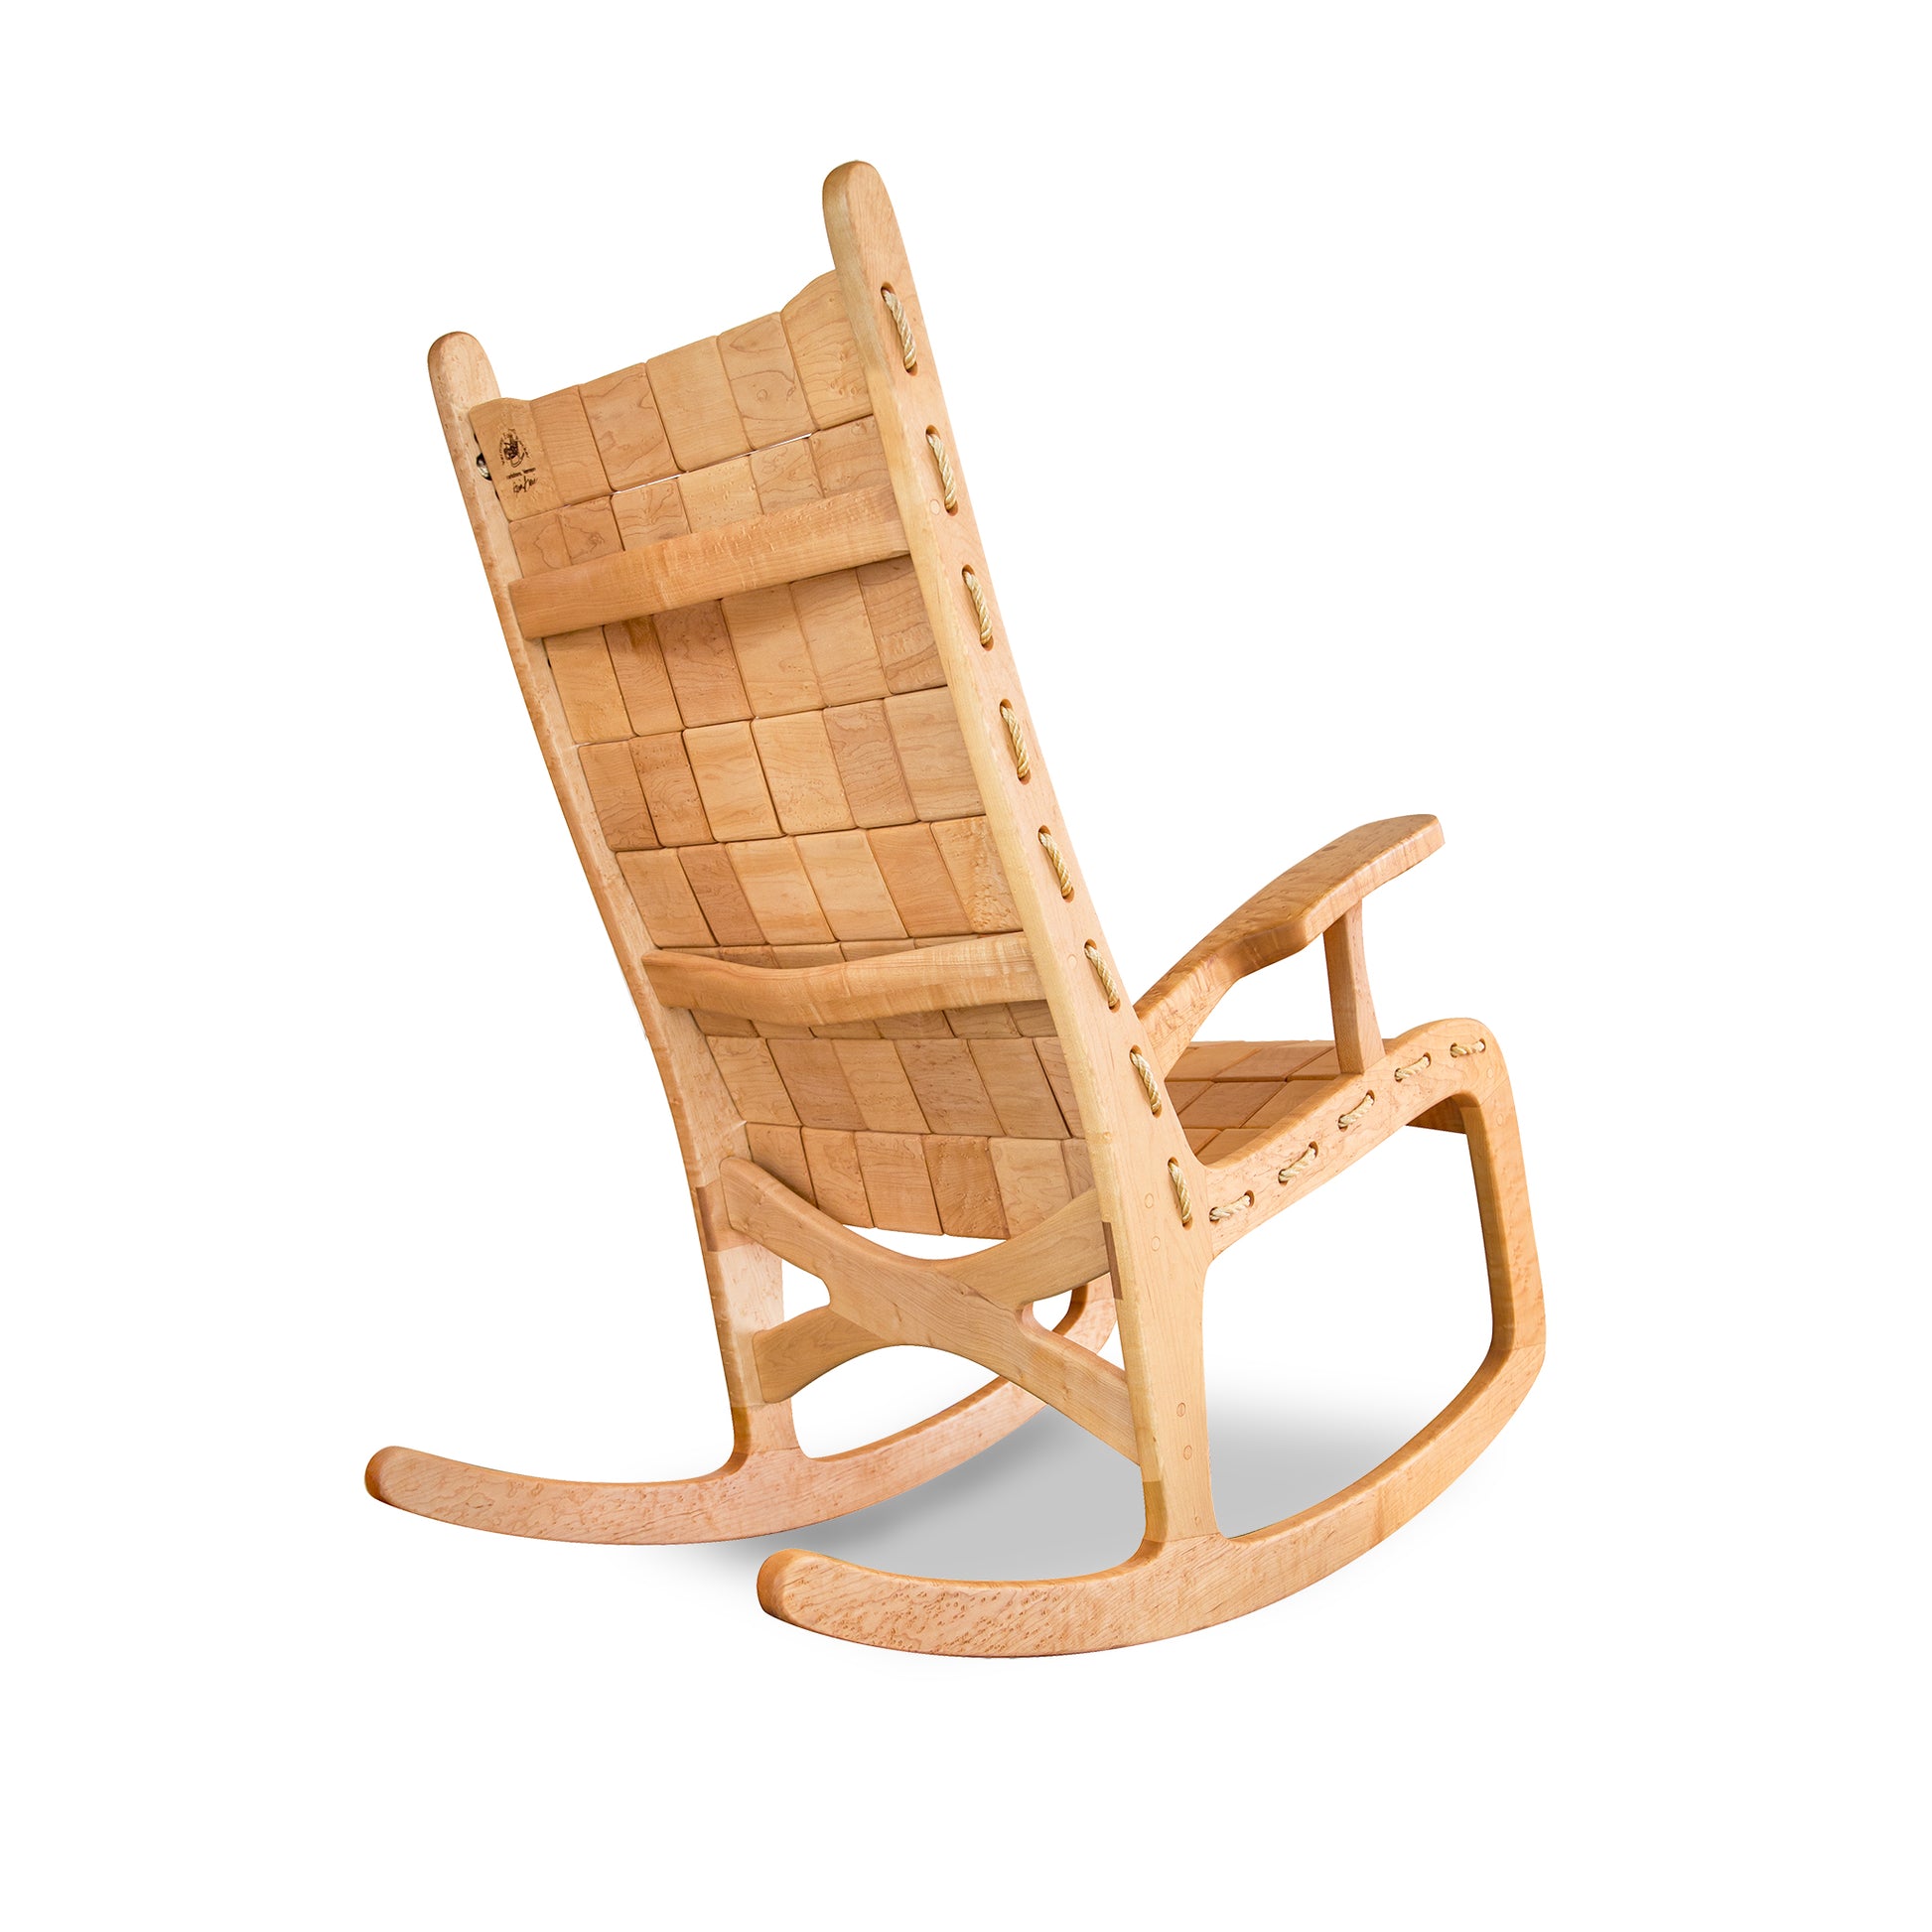 A wooden rocking chair on a white background.